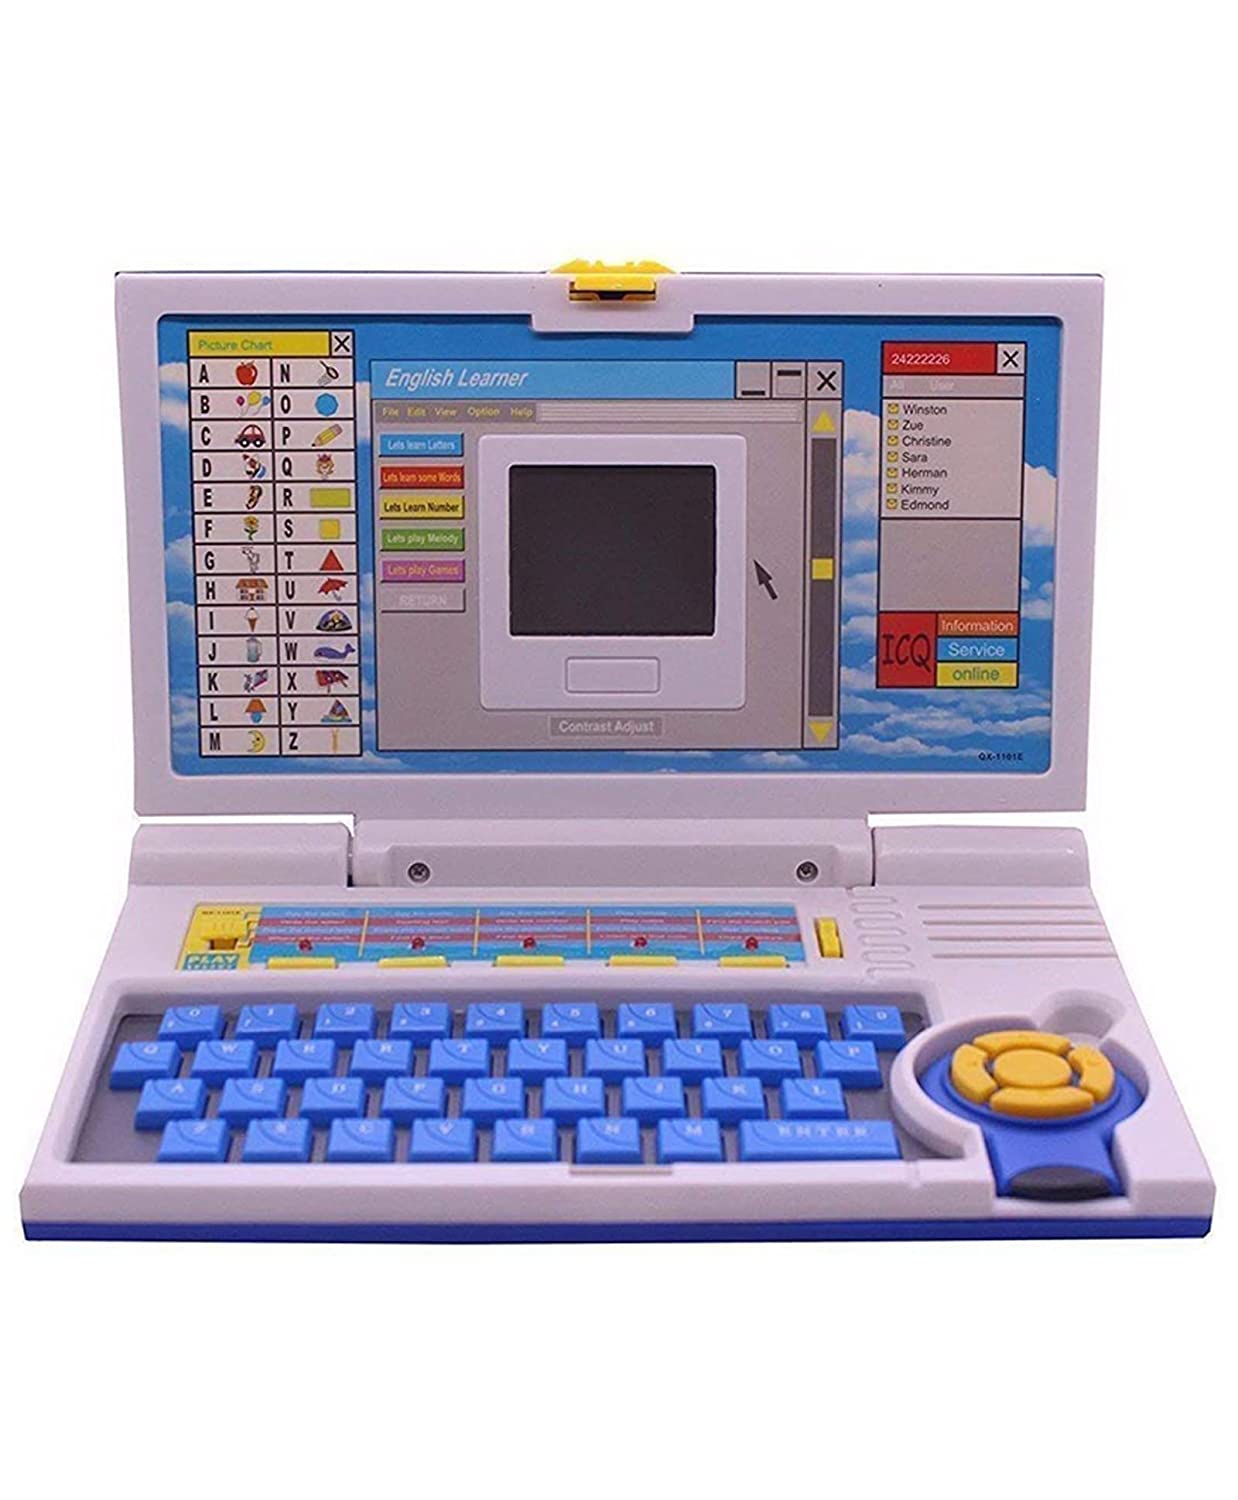 Educational Laptop Computer Toy with Mouse for Kids Above 3 Years - 20 Fun Activity Learning Machine, Now Learn Letter, Words, Games, Mathematics, Music, Logic, Memory Tool